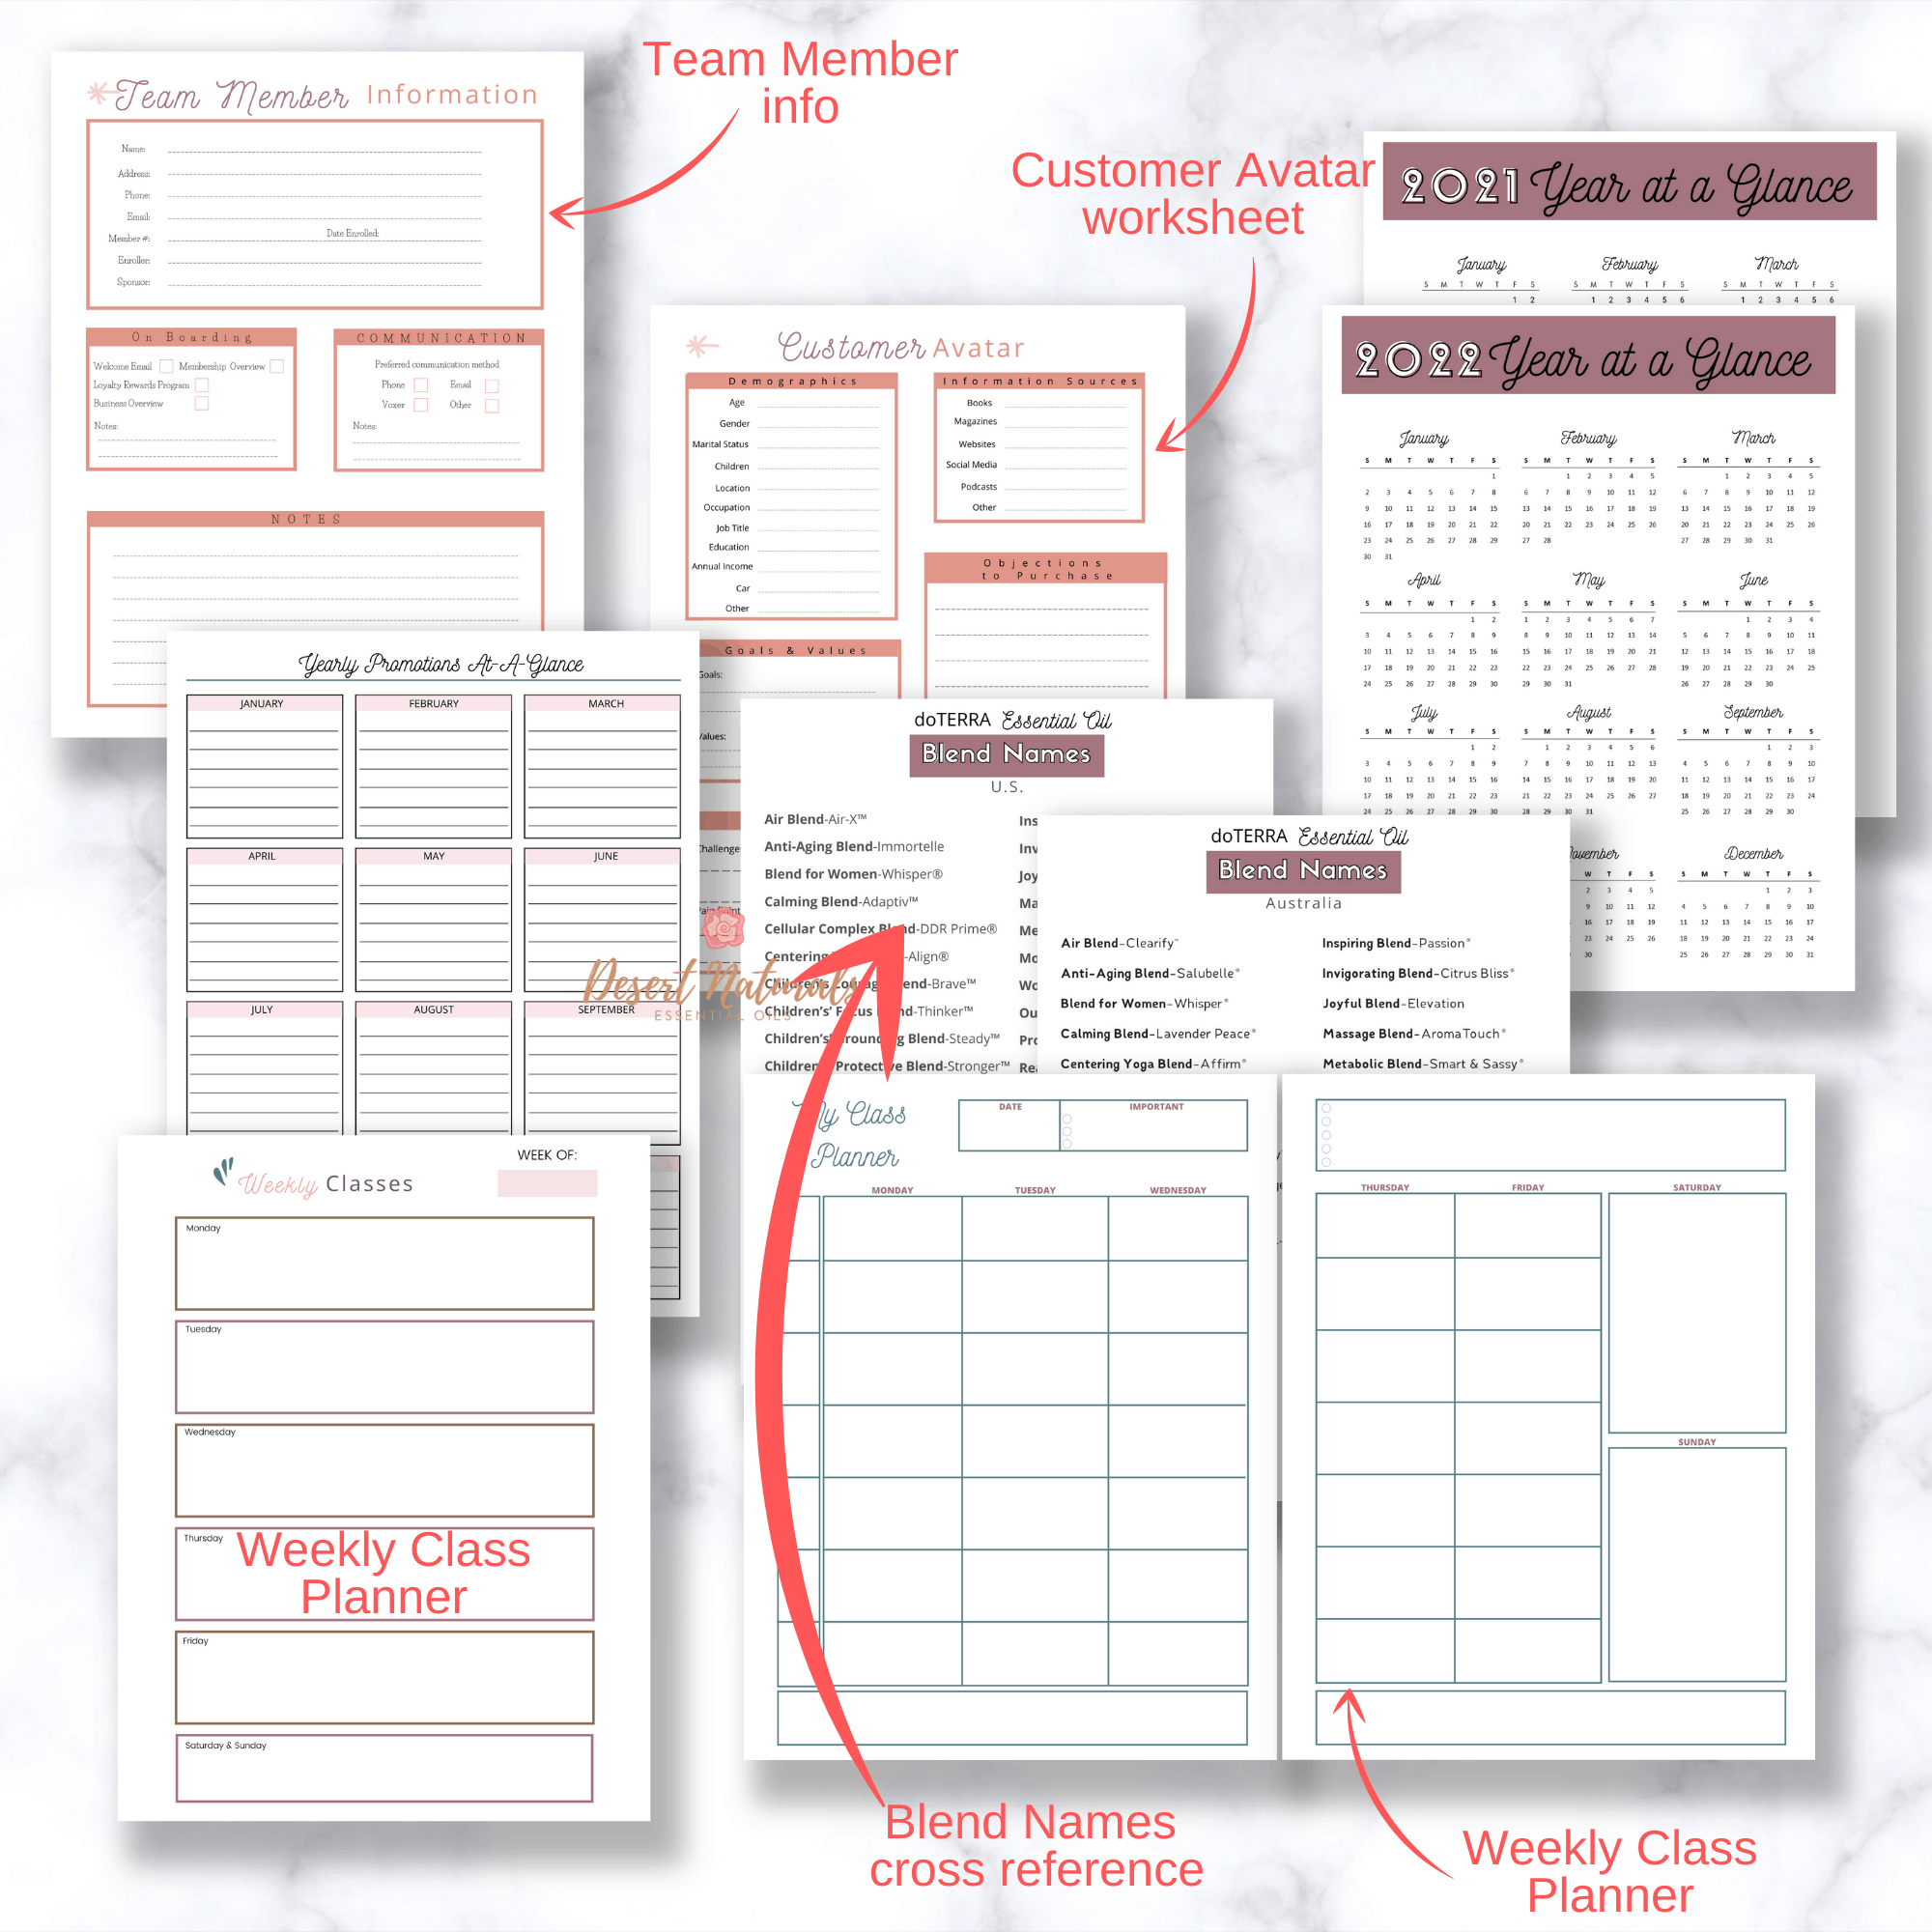 weekly class planner, customer avatar, team member info sheets from the doterra business planner